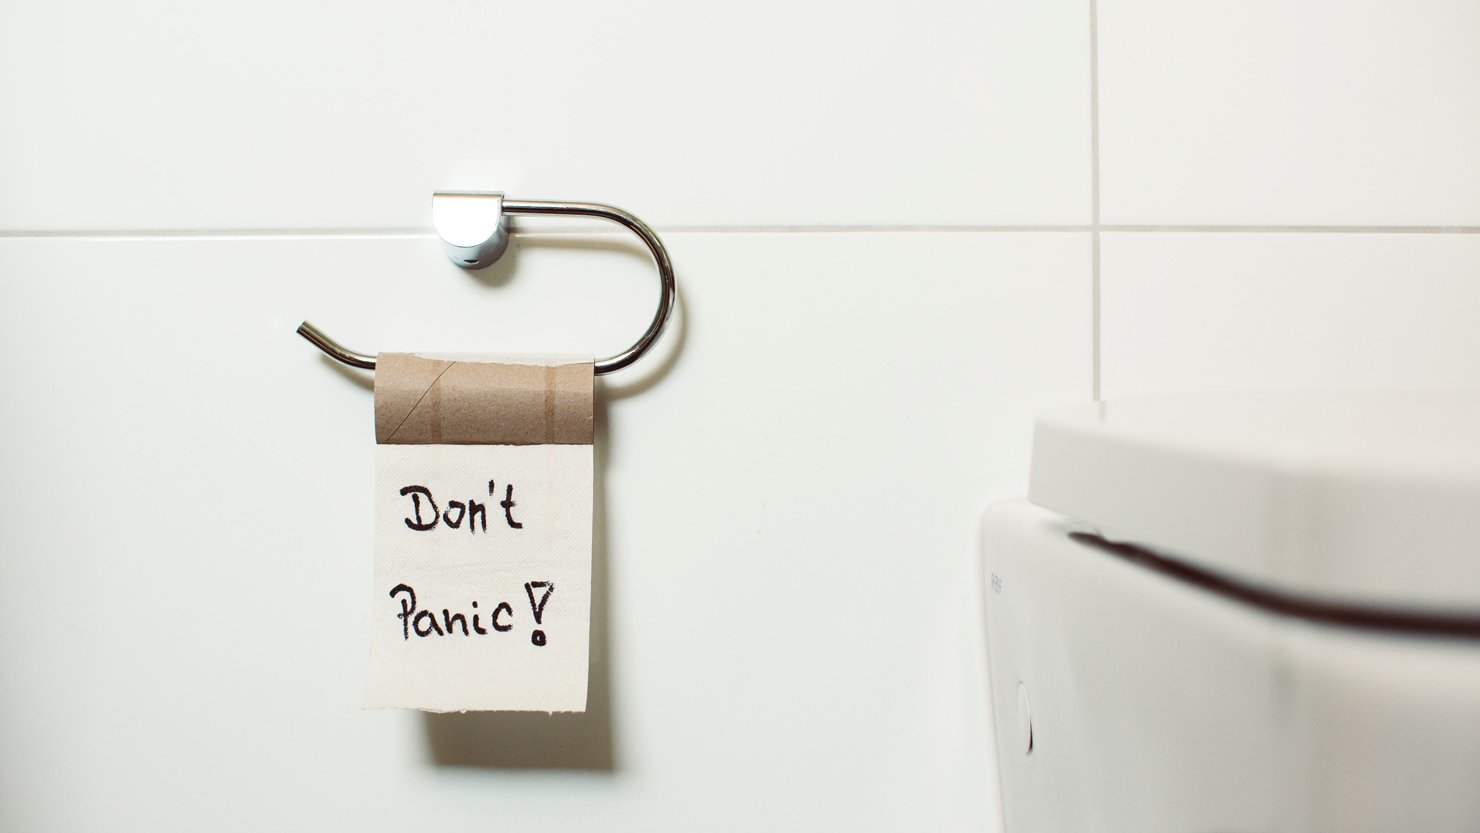 Don't panic sign on a toilet roll holder